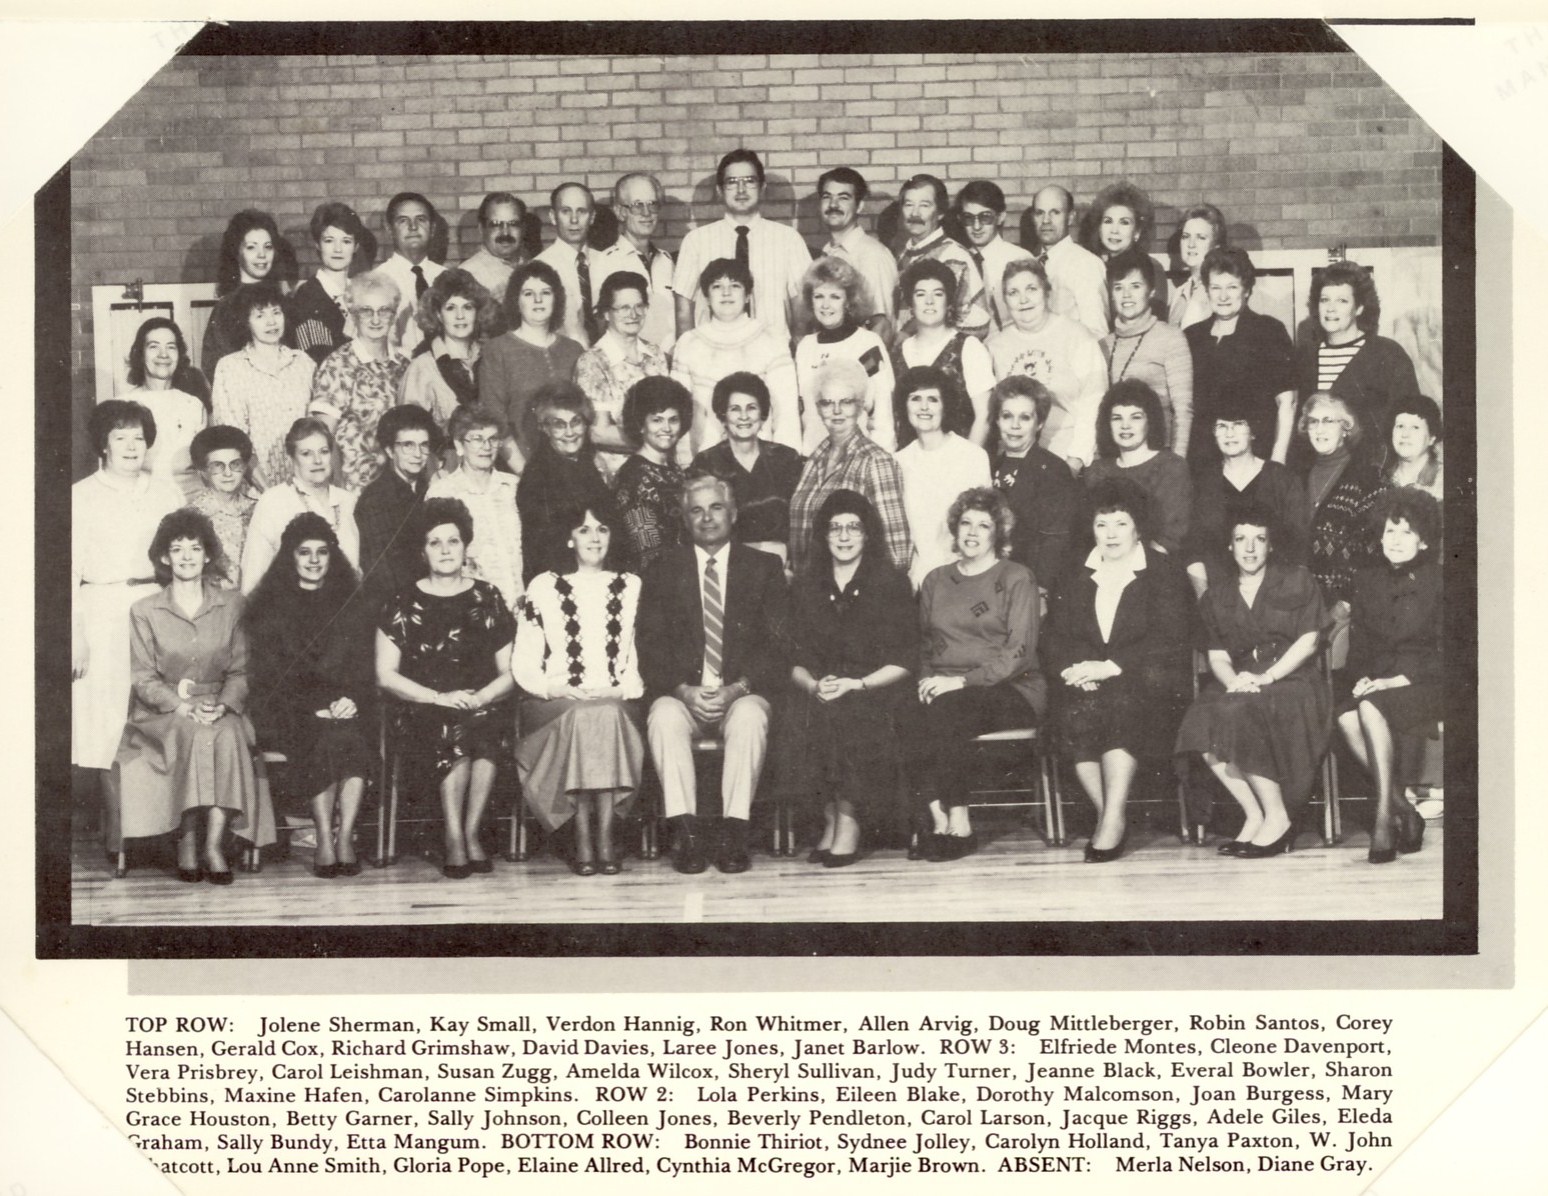 1989-1990 faculty & staff at East Elementary School